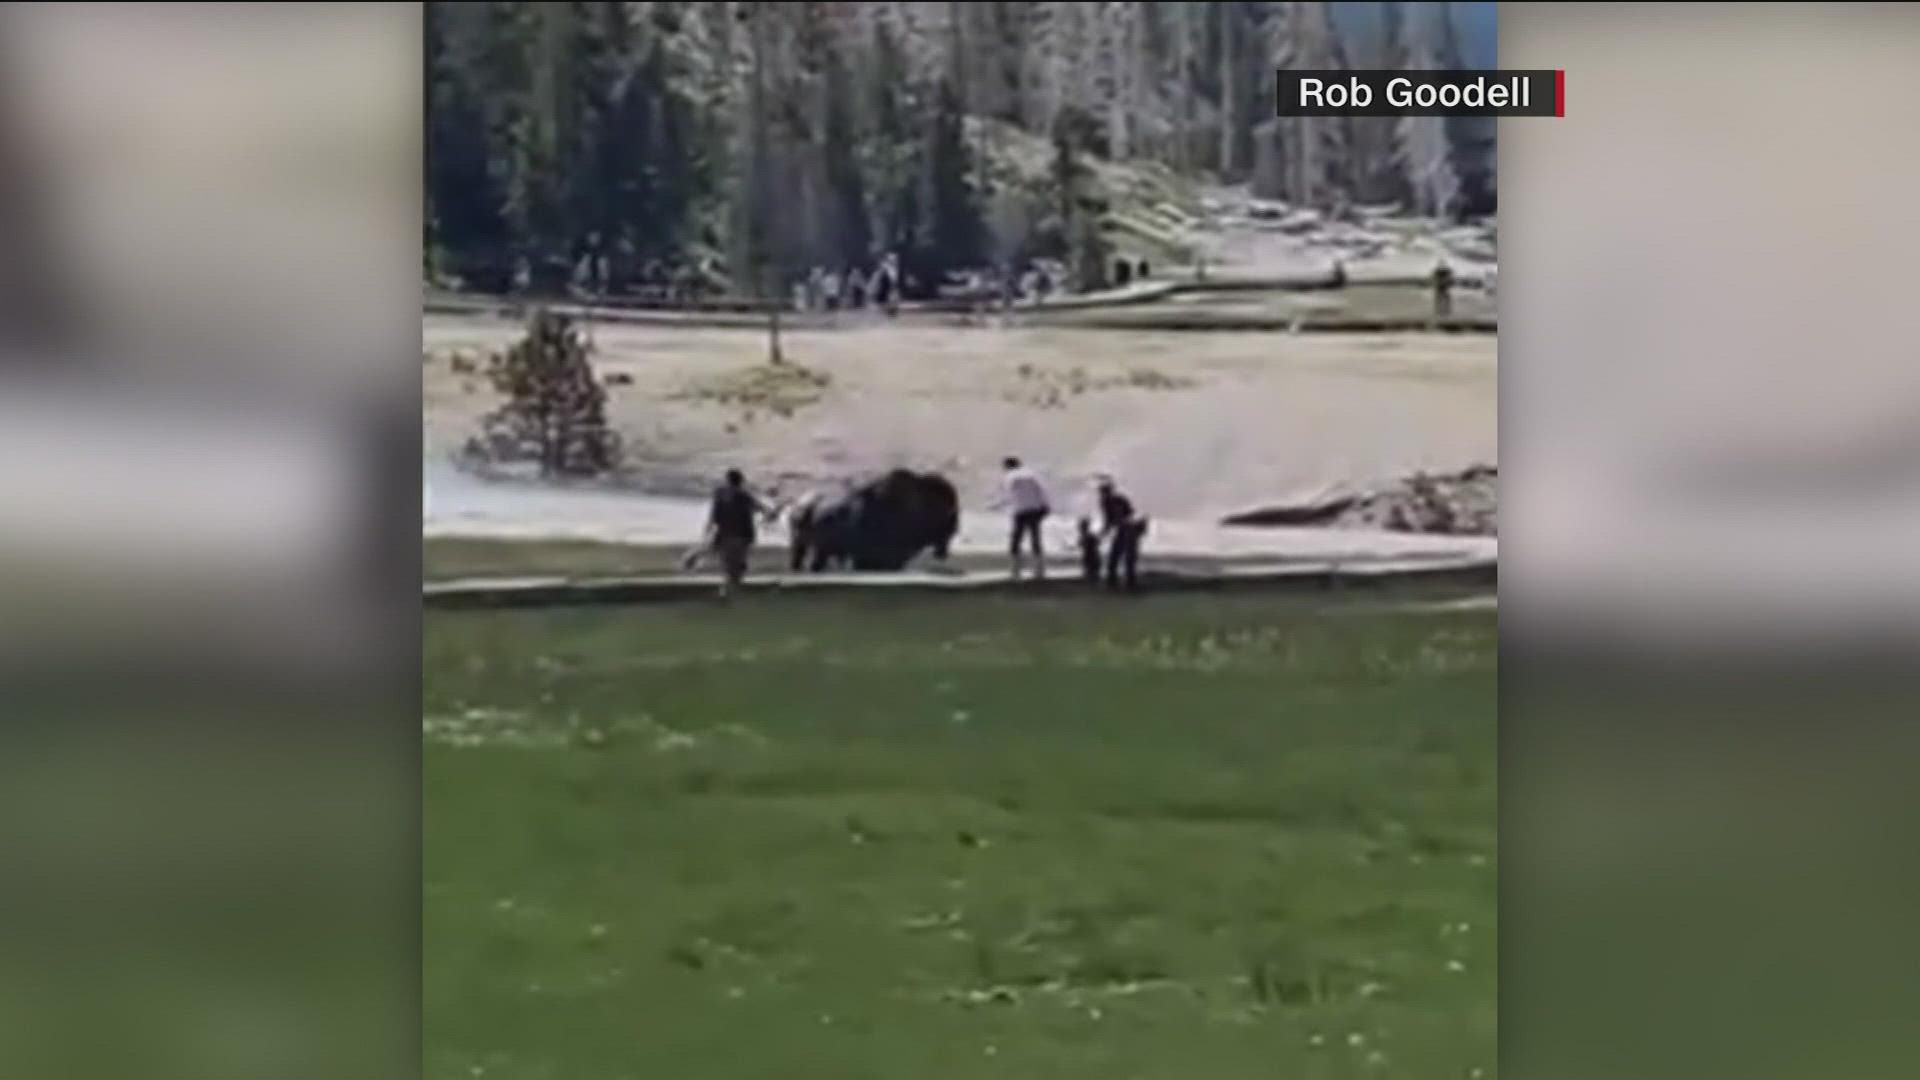 A 34-year-old man was walking on a boardwalk when a bull bison charged the group.